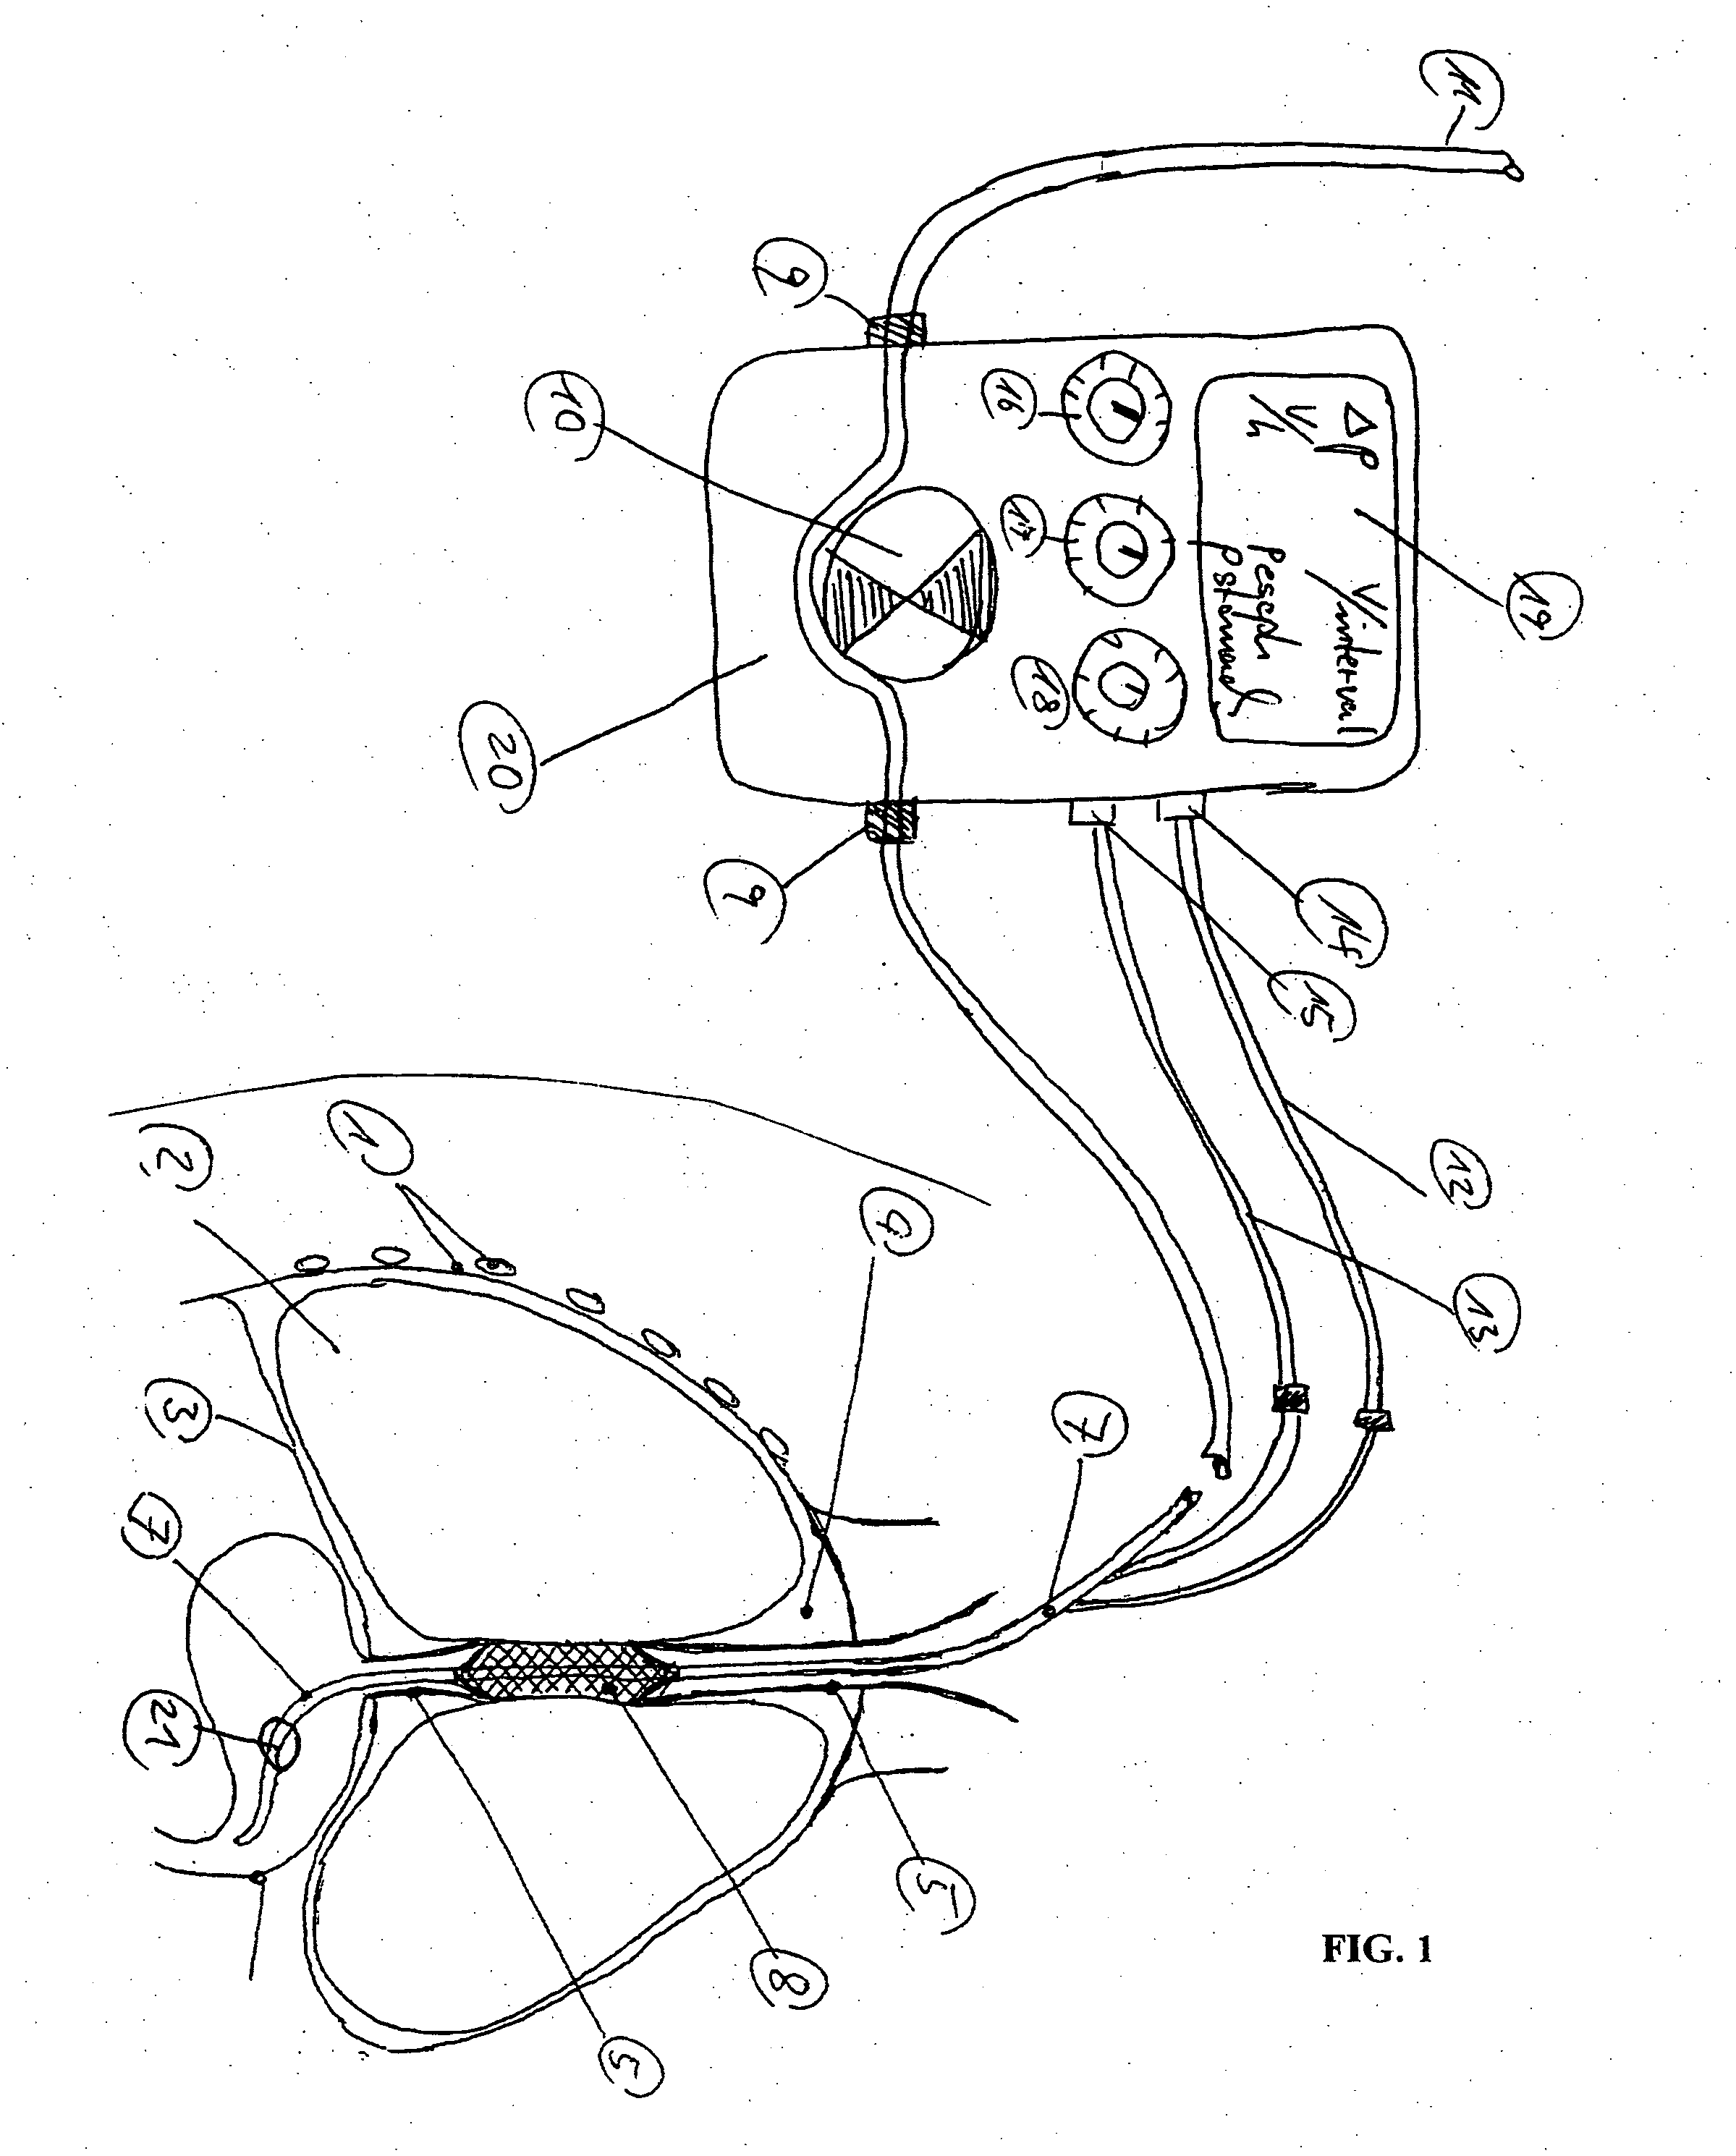 Gastro-esophageal reflux control system and pump